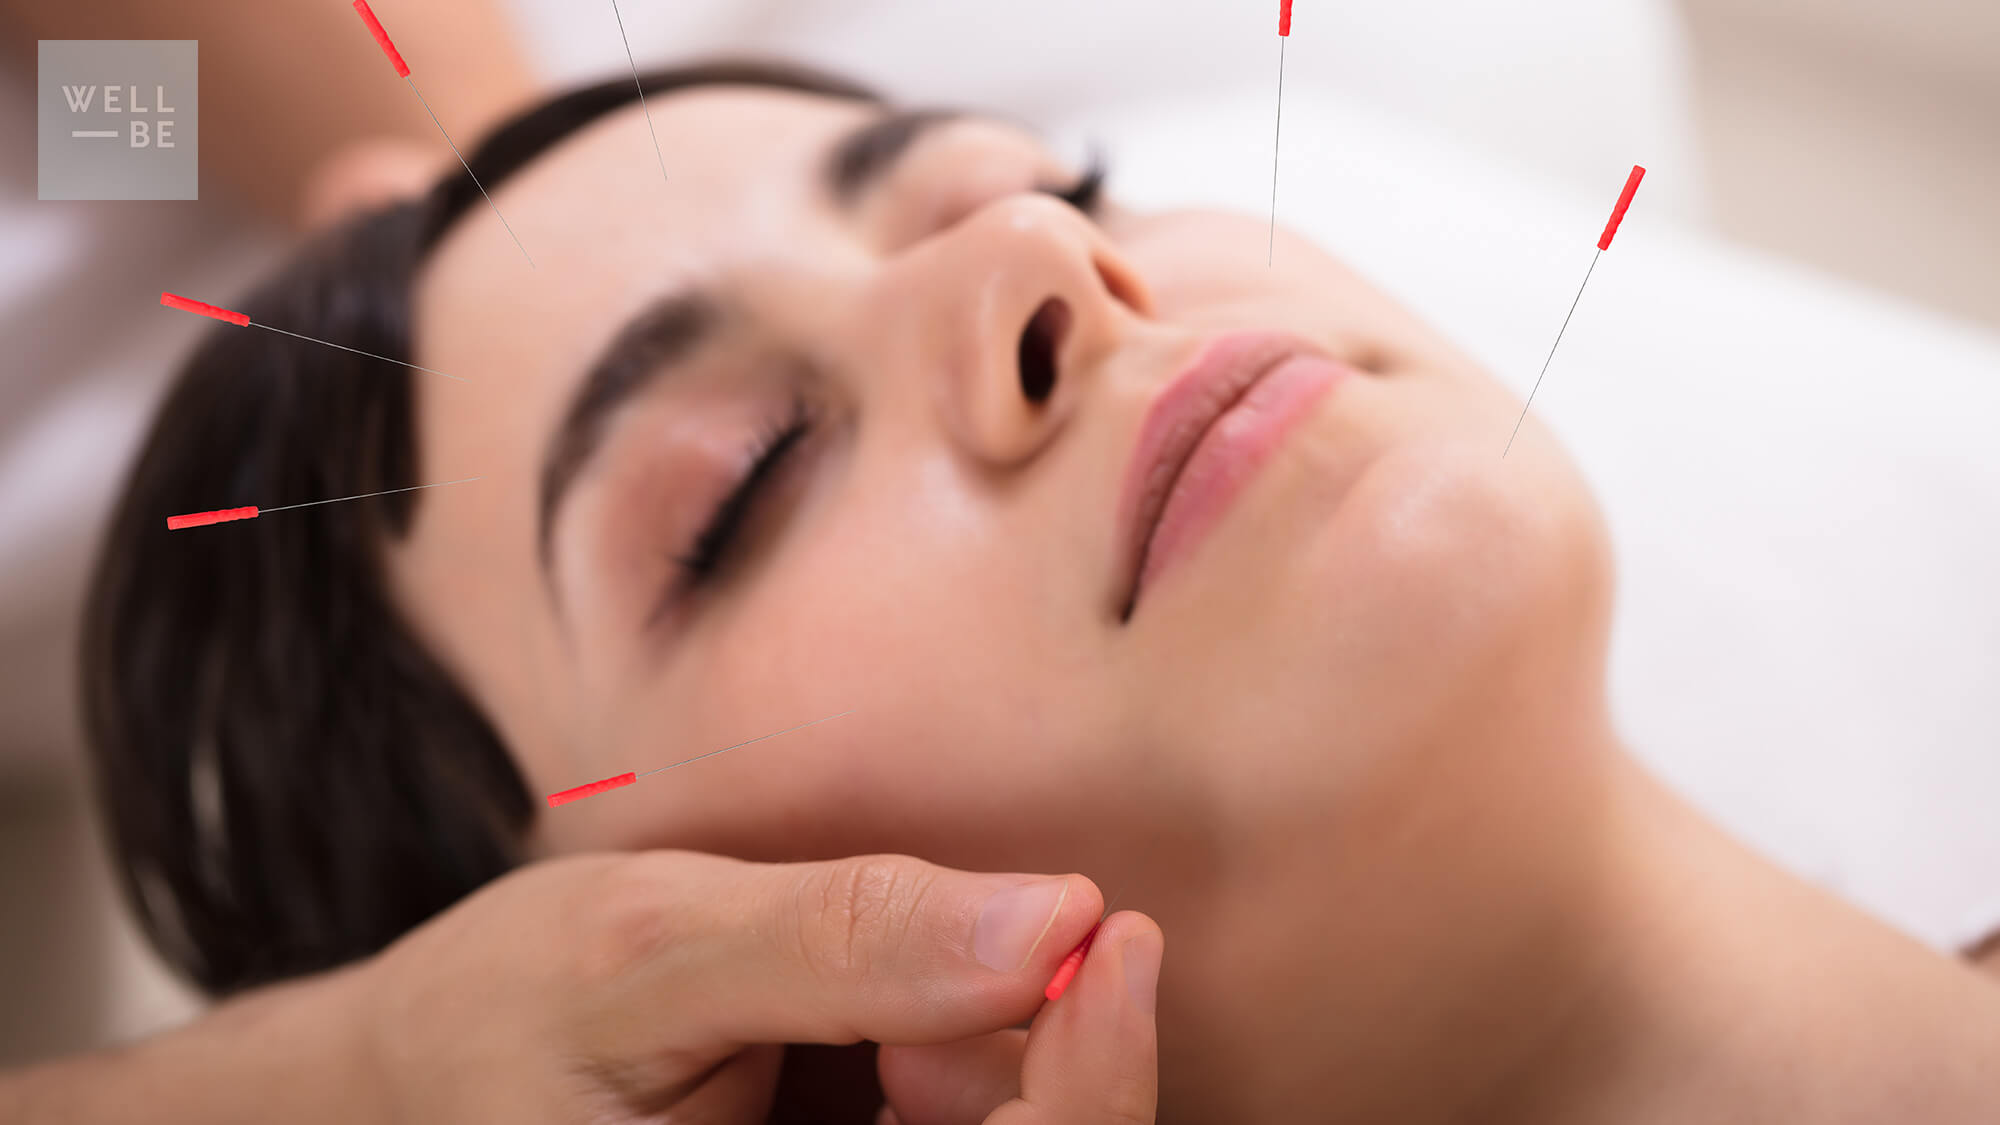 Acupuncture Image For Site 